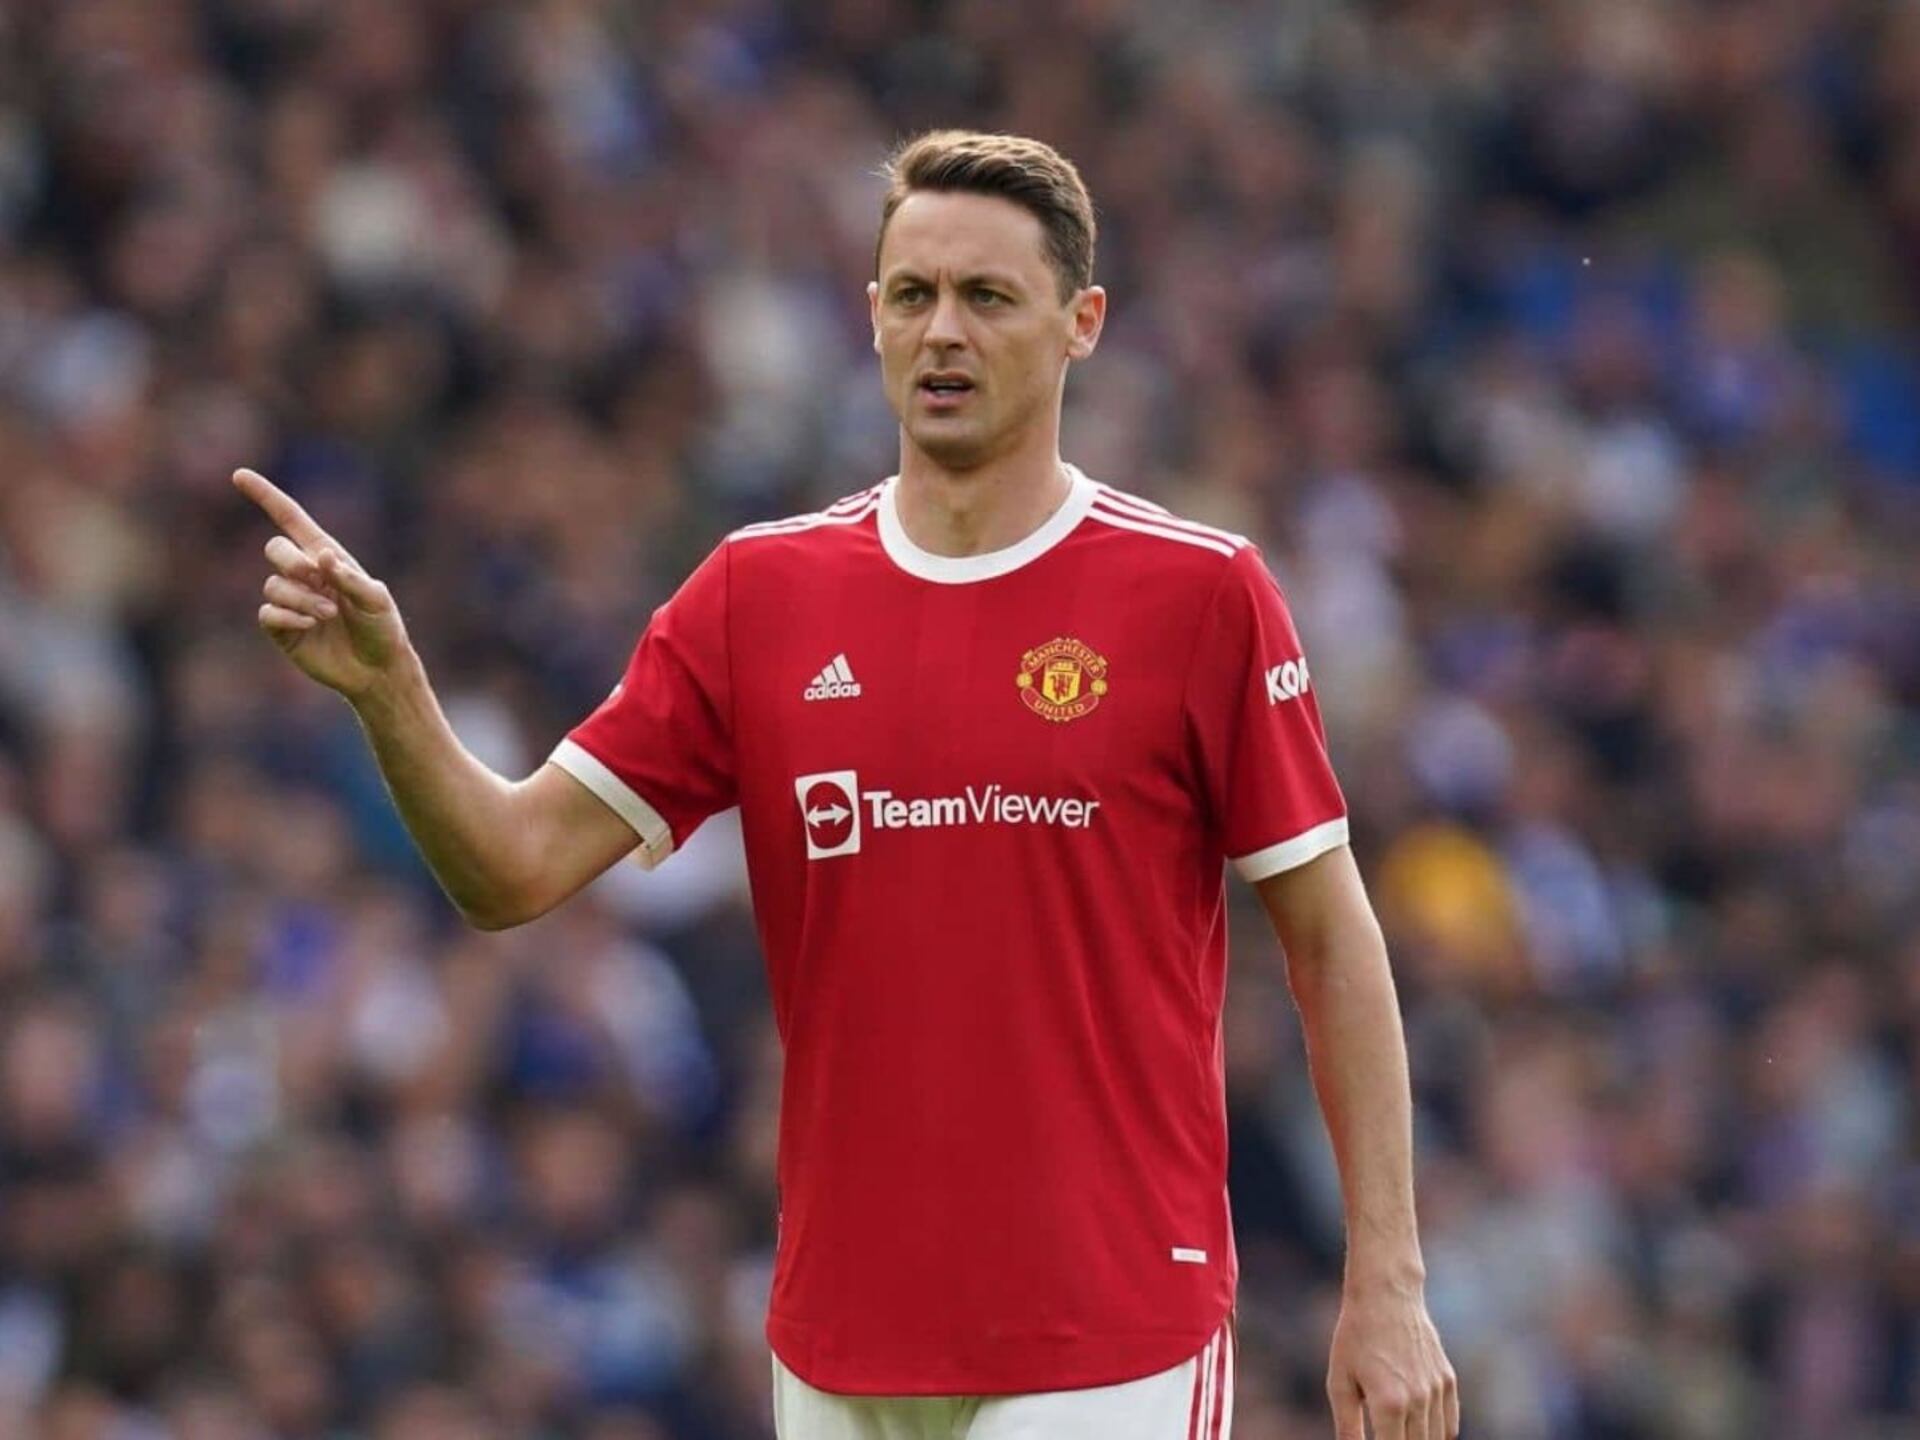 Nemanja Matić will leave Manchester United, but he knows who he wants to replace him